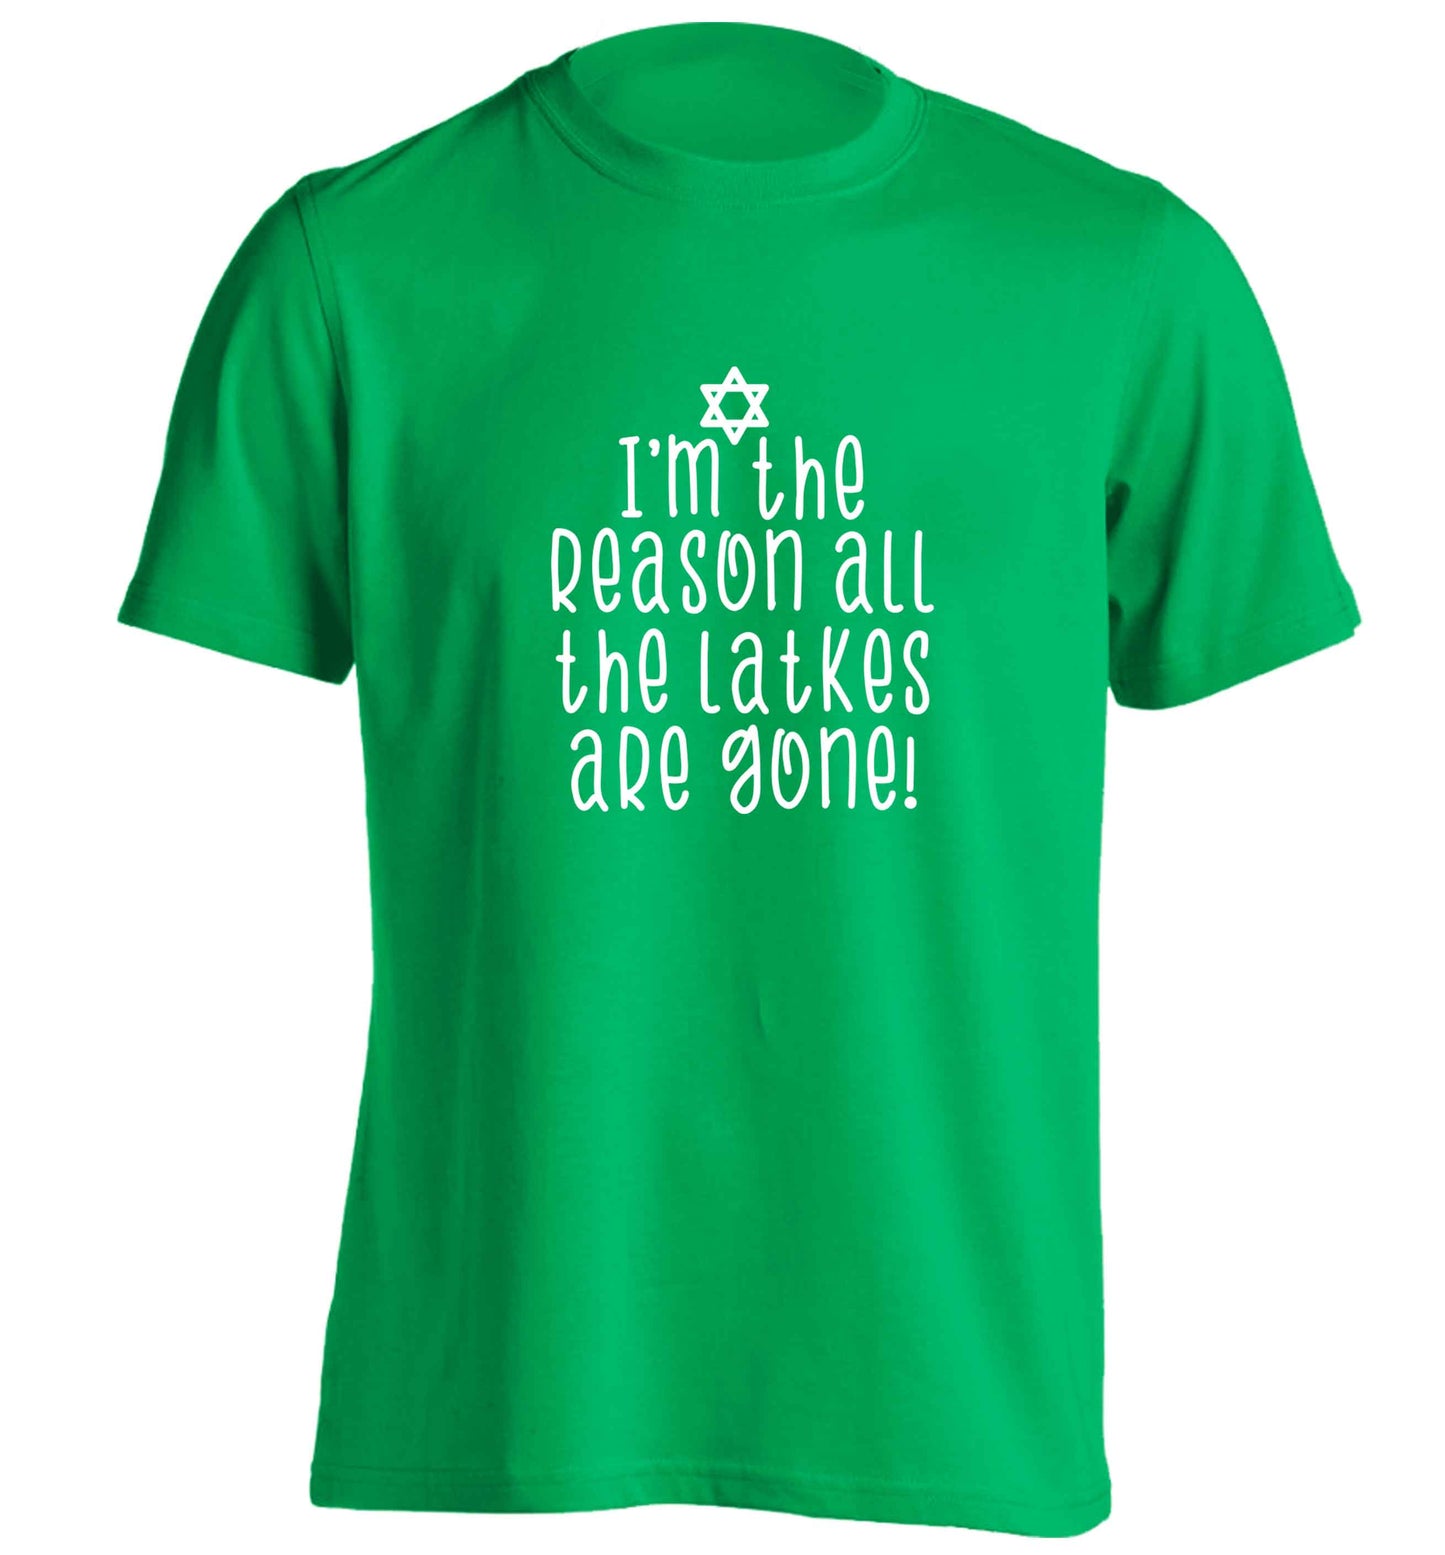 I'm the reason all the latkes are gone adults unisex green Tshirt 2XL